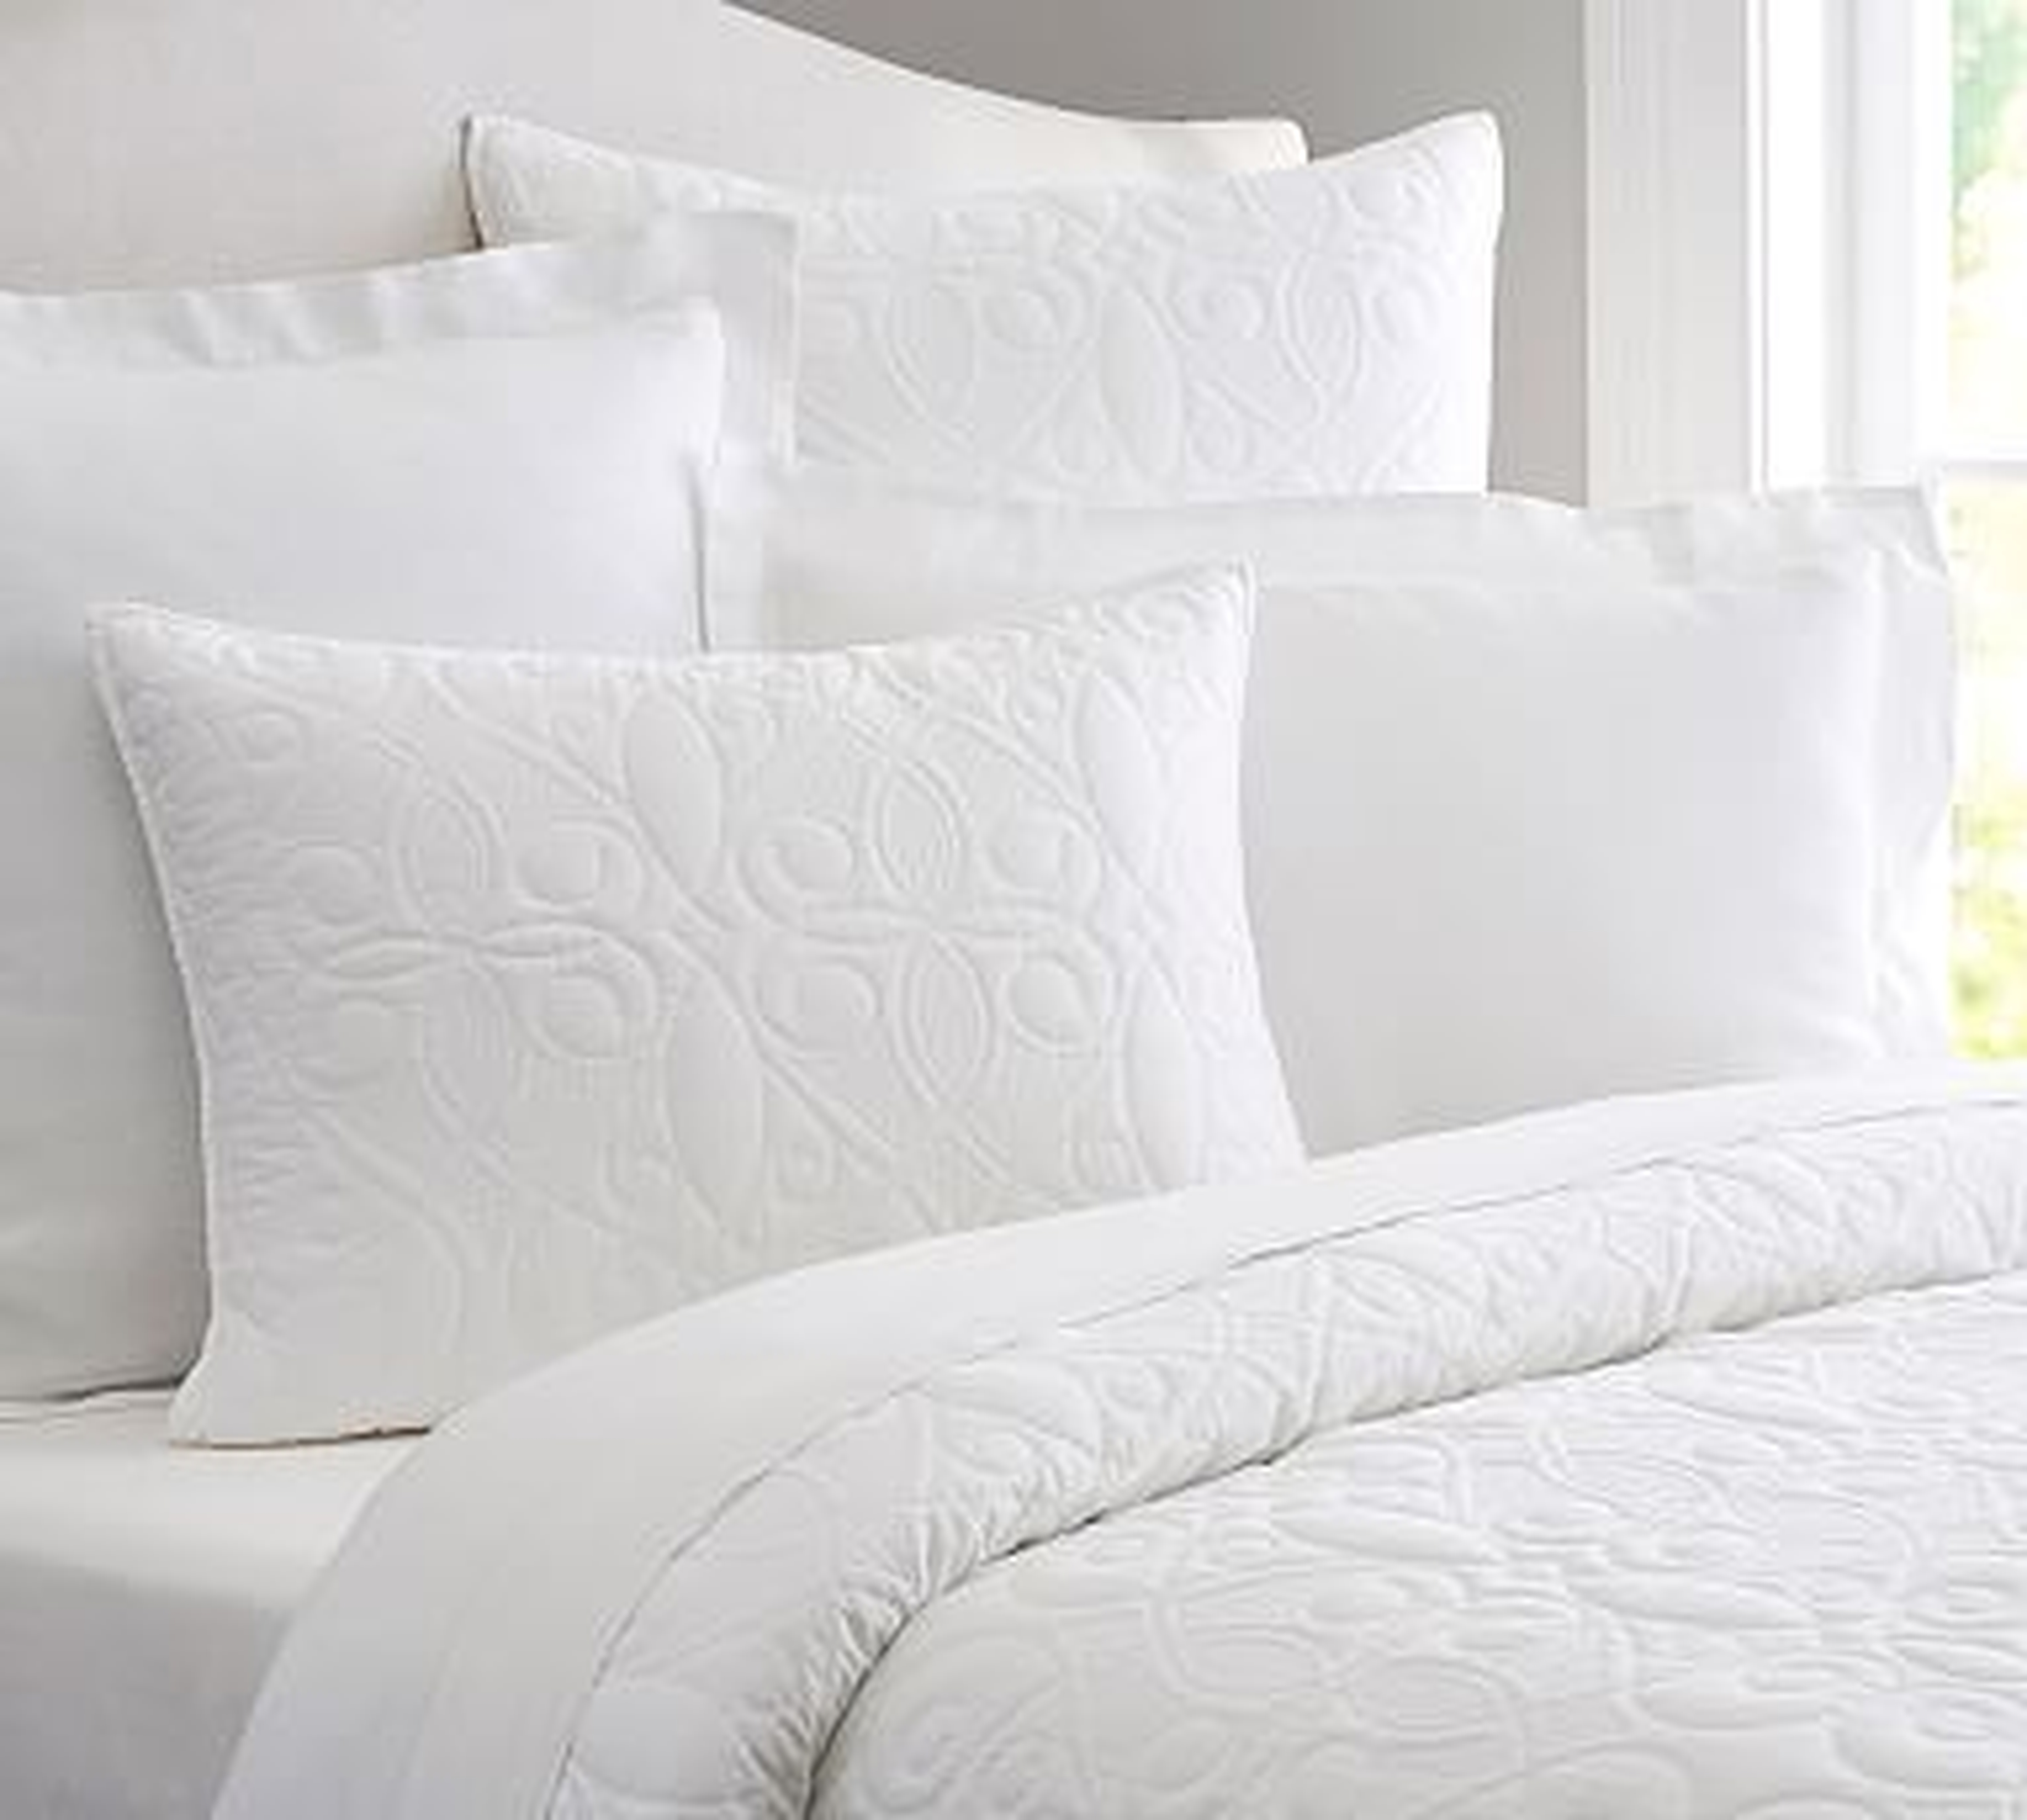 Washed Cotton Quilt, Full/Queen, White - Pottery Barn